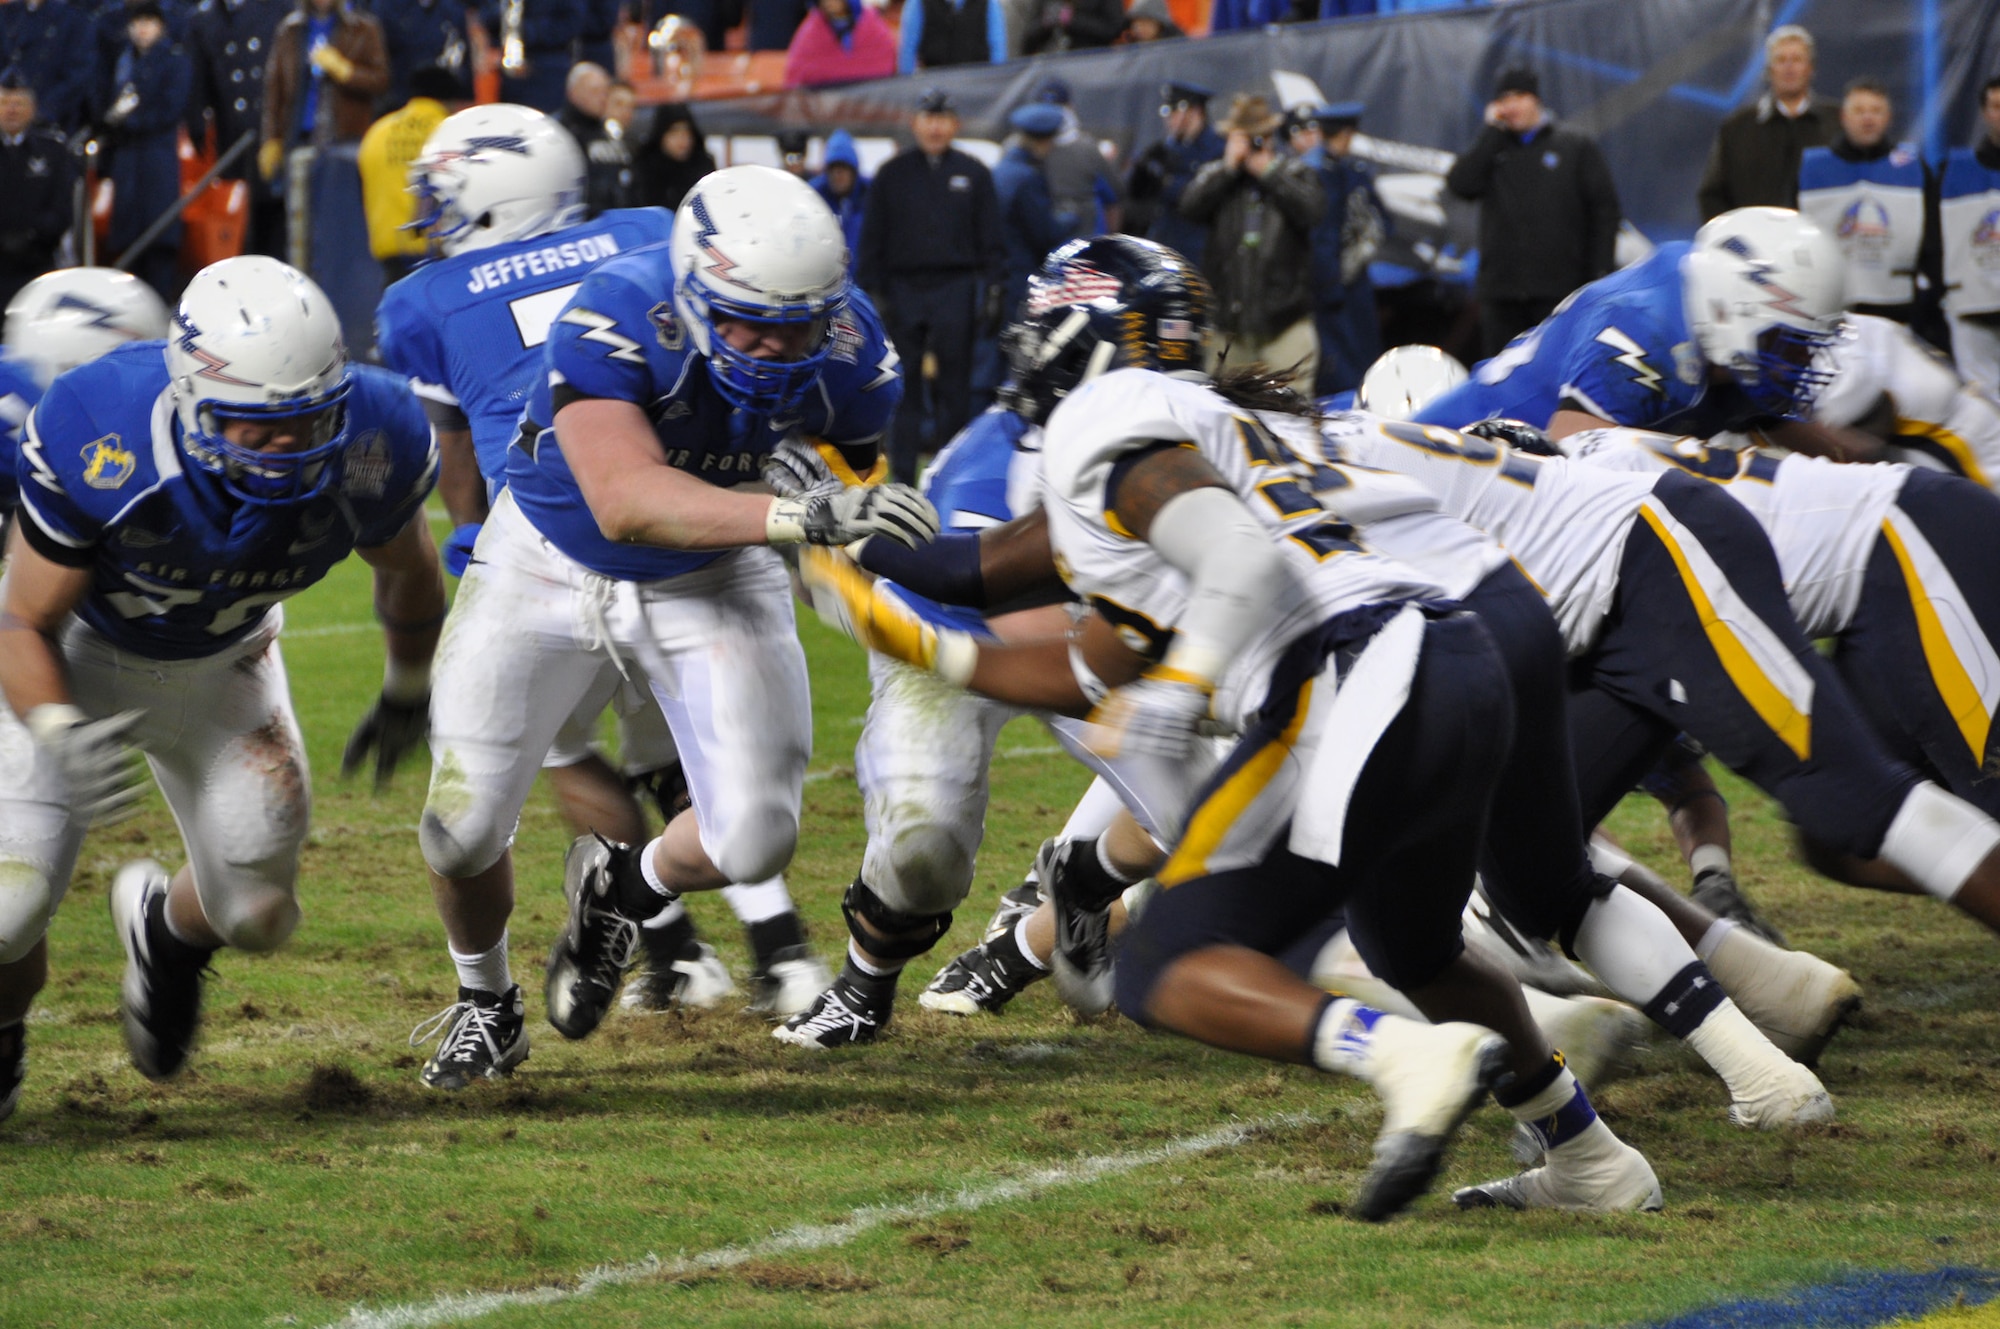 The Air Force Academy's offensive line holds back the Toledo Rocket's defense prior to scoring at the 2011 Military Bowl at Robert F. Kennedy Stadium Dec. 28, 2011 in Washington, D.C. (U.S. Air Force photo/Senior Airman Bobby Pilch)